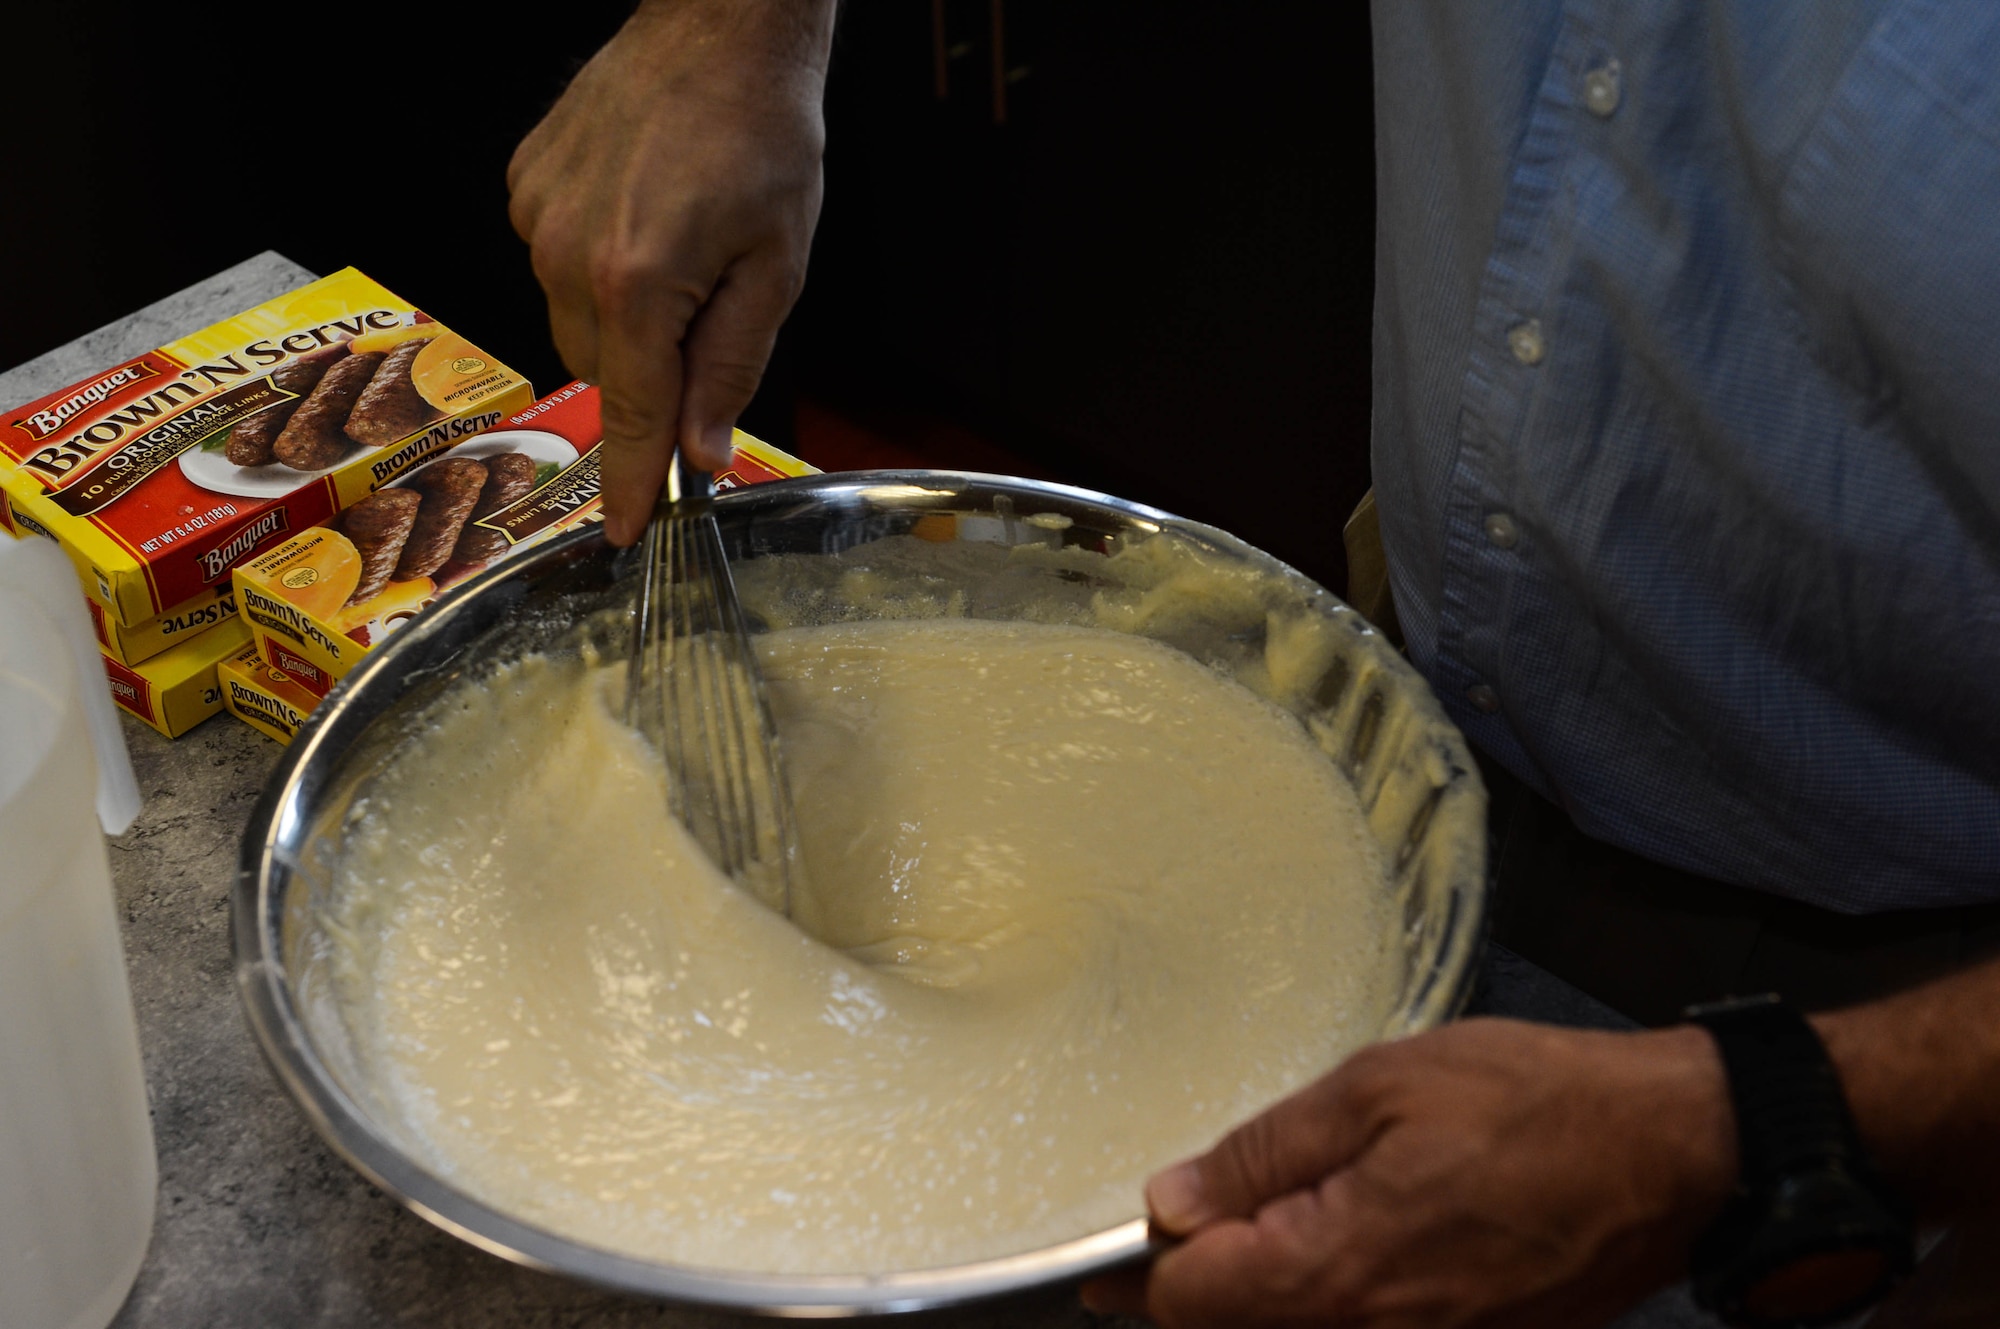 U.S. Air Force Col. Robert Winkler, 52nd Operations Group commander, mixes pancake batter for a community breakfast in the chapel at Spangdahlem Air Base, Germany, Aug. 17, 2014. The Spangdahlem Catholic community hosted the breakfast for families after a religious service. The complimentary meal fed more than 80 people. The chapel provides services for a variety of religious backgrounds. (U.S. Air Force photo by Airman 1st Class Kyle Gese/Released)